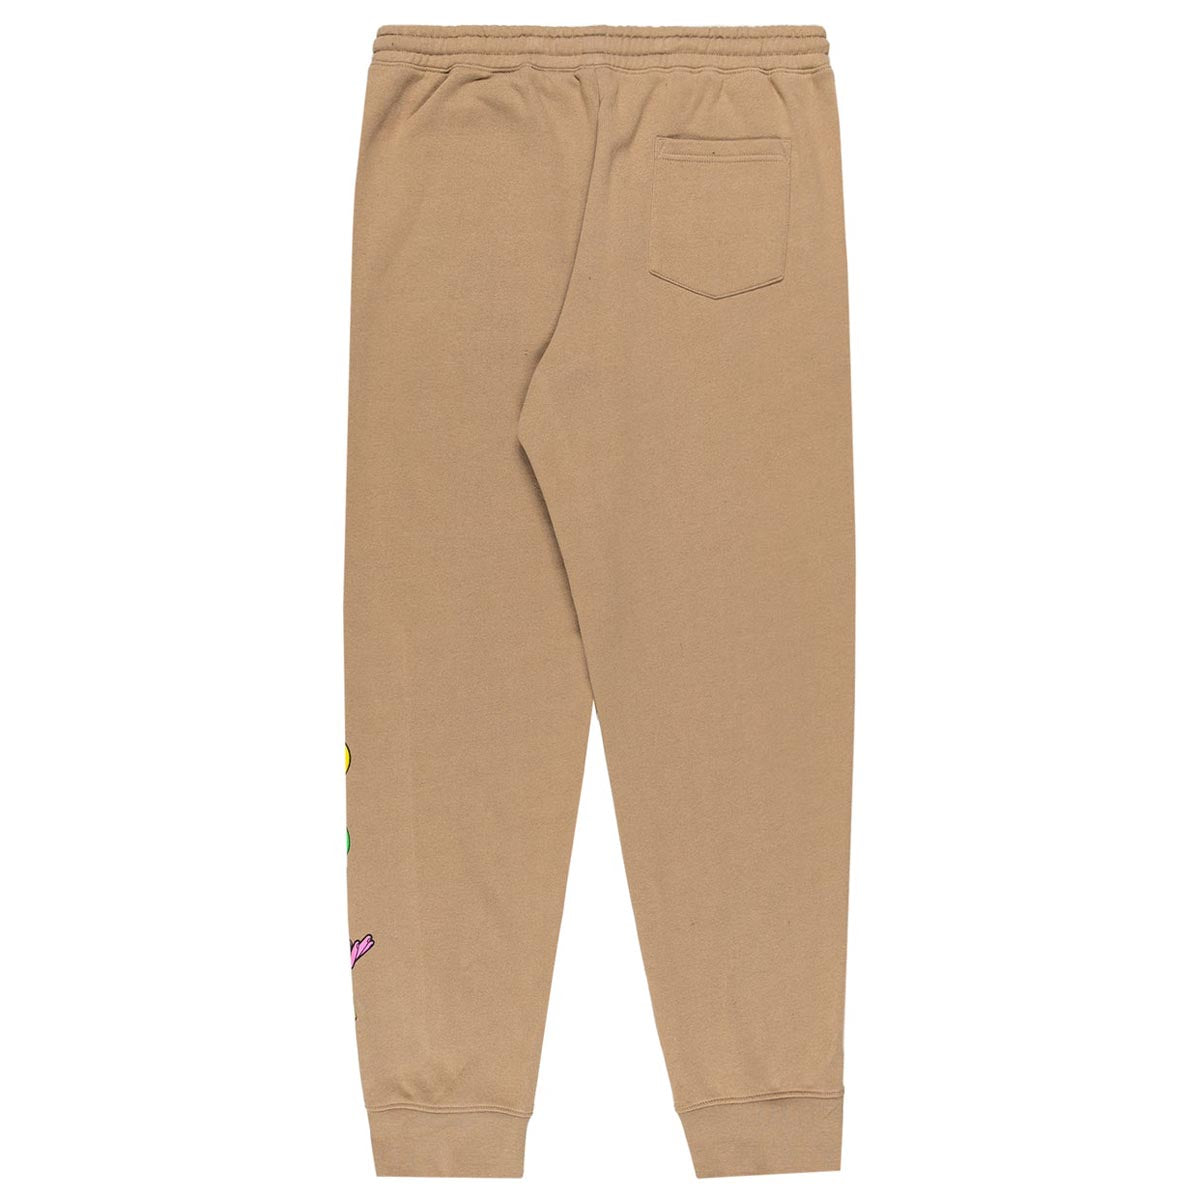 Grizzly x Smiley World Sweat Pants - Tan image 3